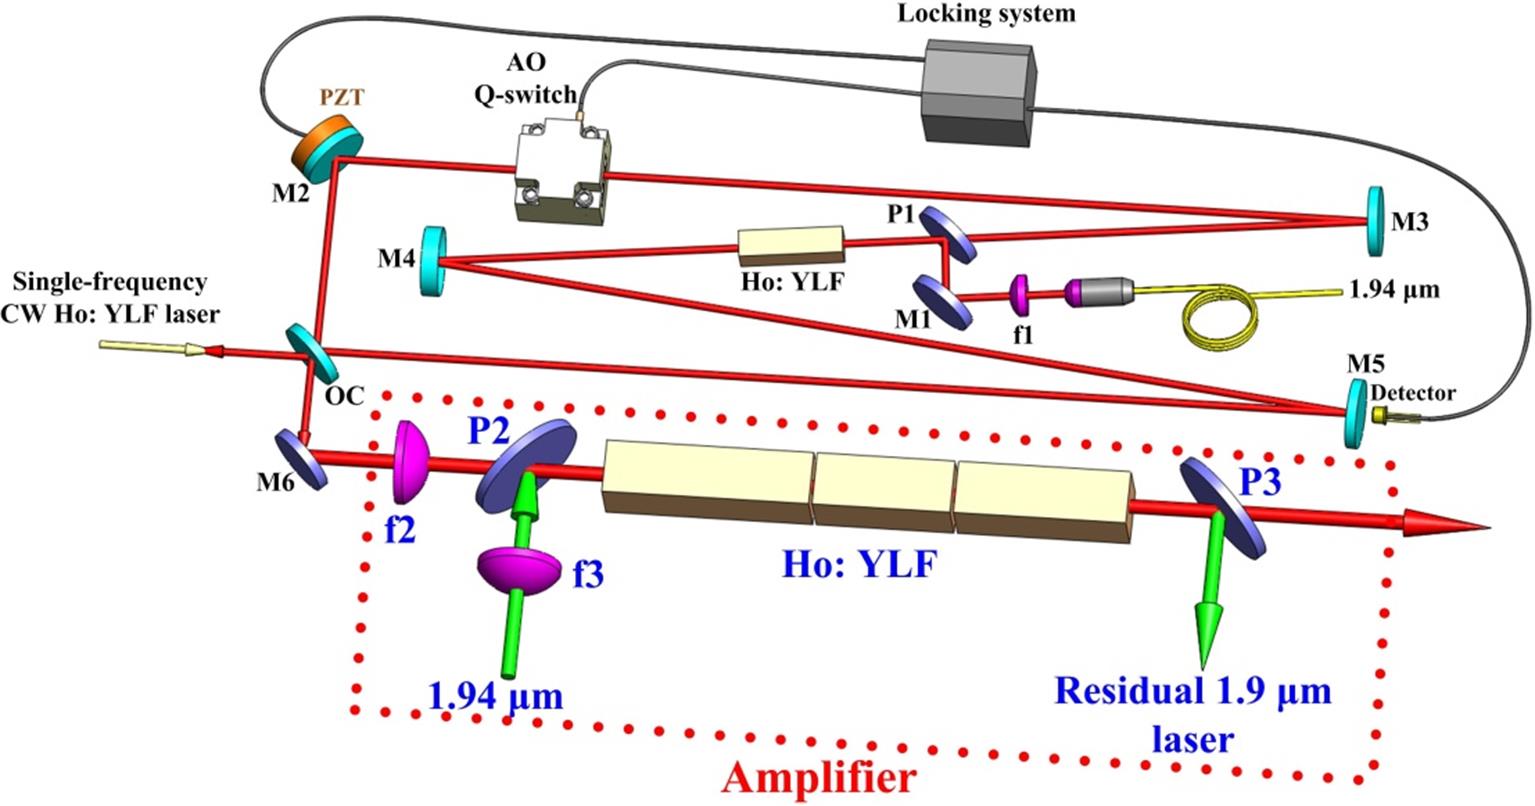 Experimental setup of the single-frequency pulsed Ho:YLF ring laser and the single-pass amplifier.